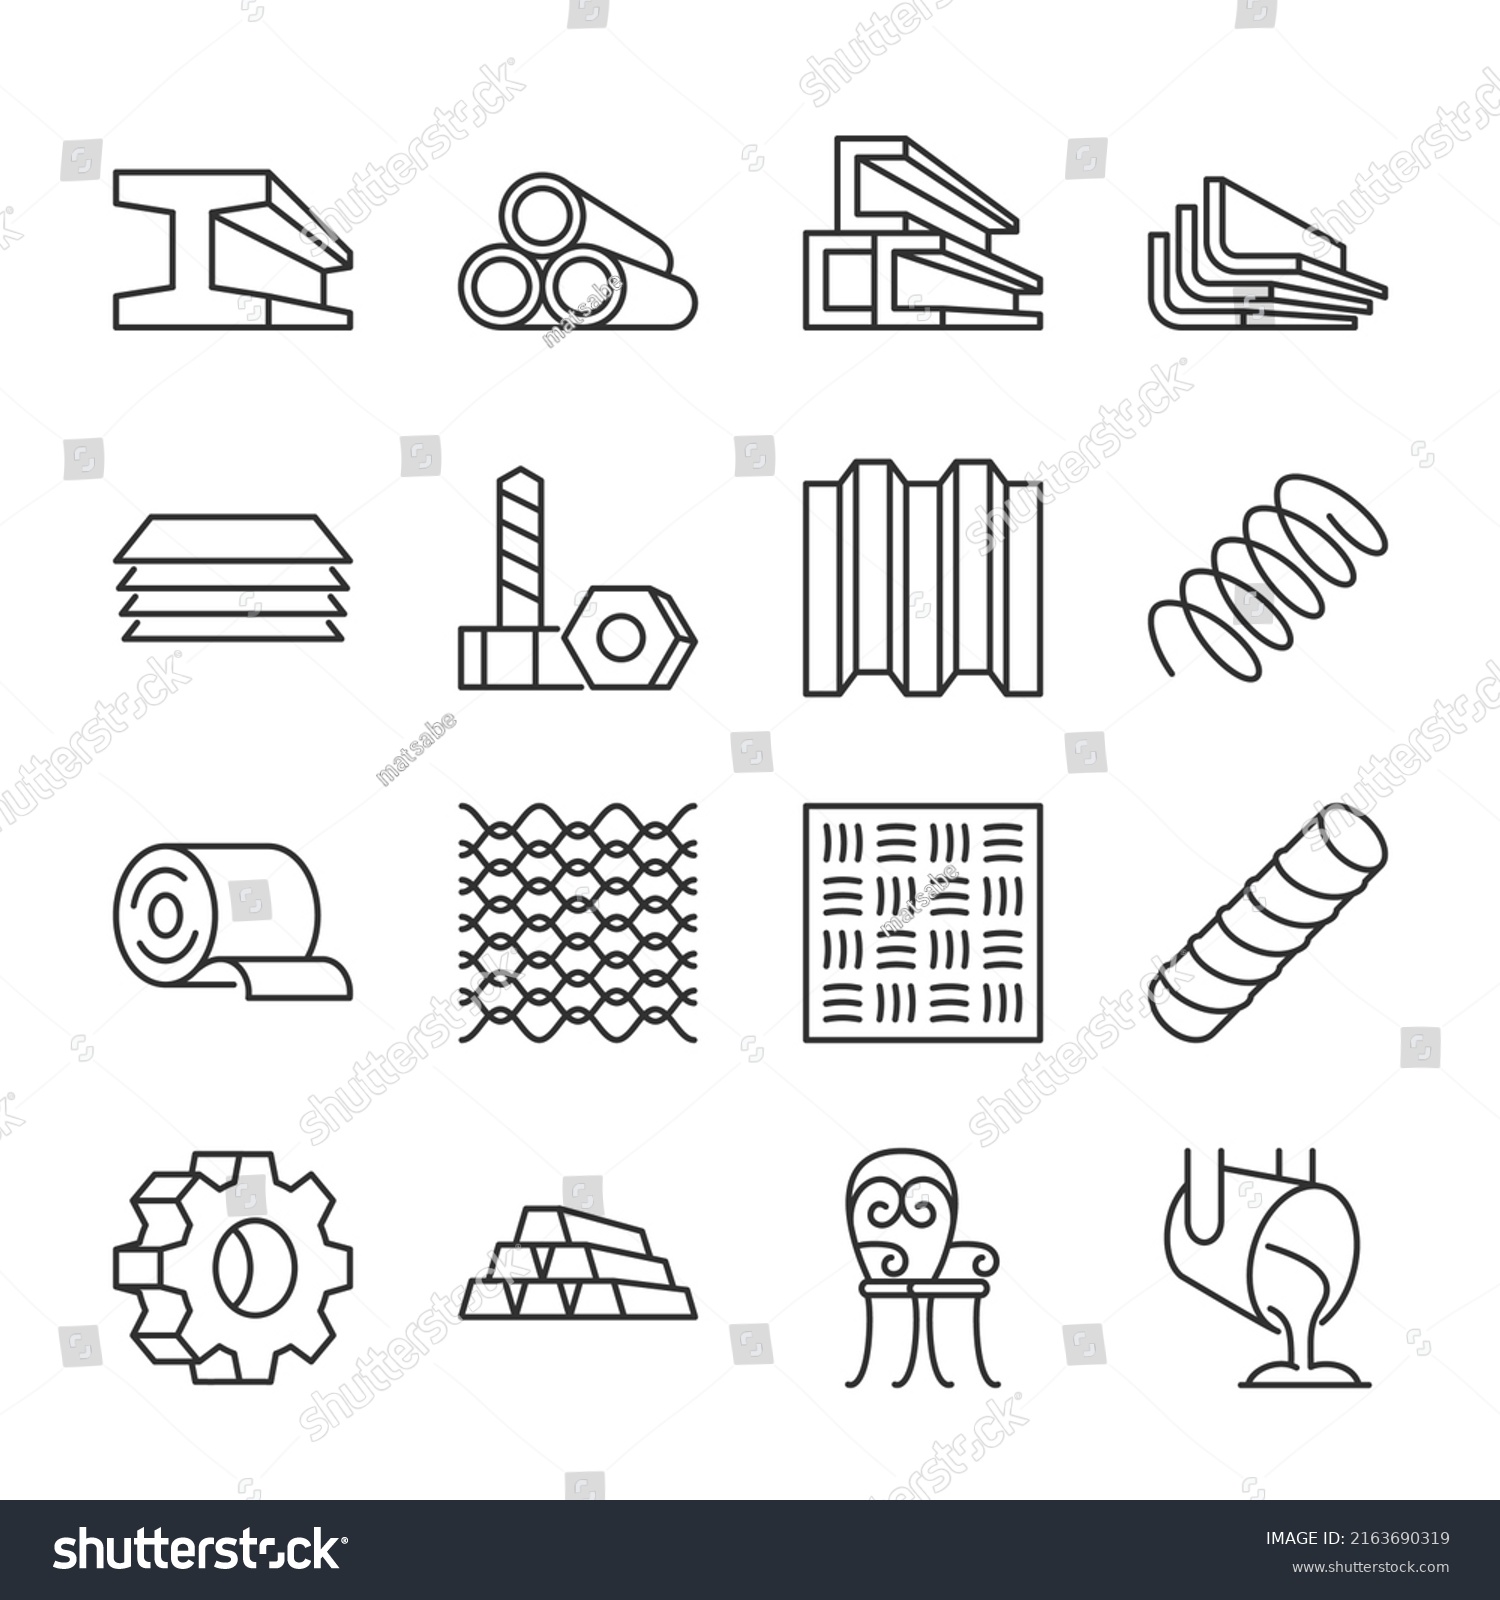 Metal products icons set. Fabrication of metal raw materials, parts, linear icon collection. T-beam, tube, channel, angle, hardware, bending, spring, mesh, metal bar, gear, casting. Line with editable #2163690319